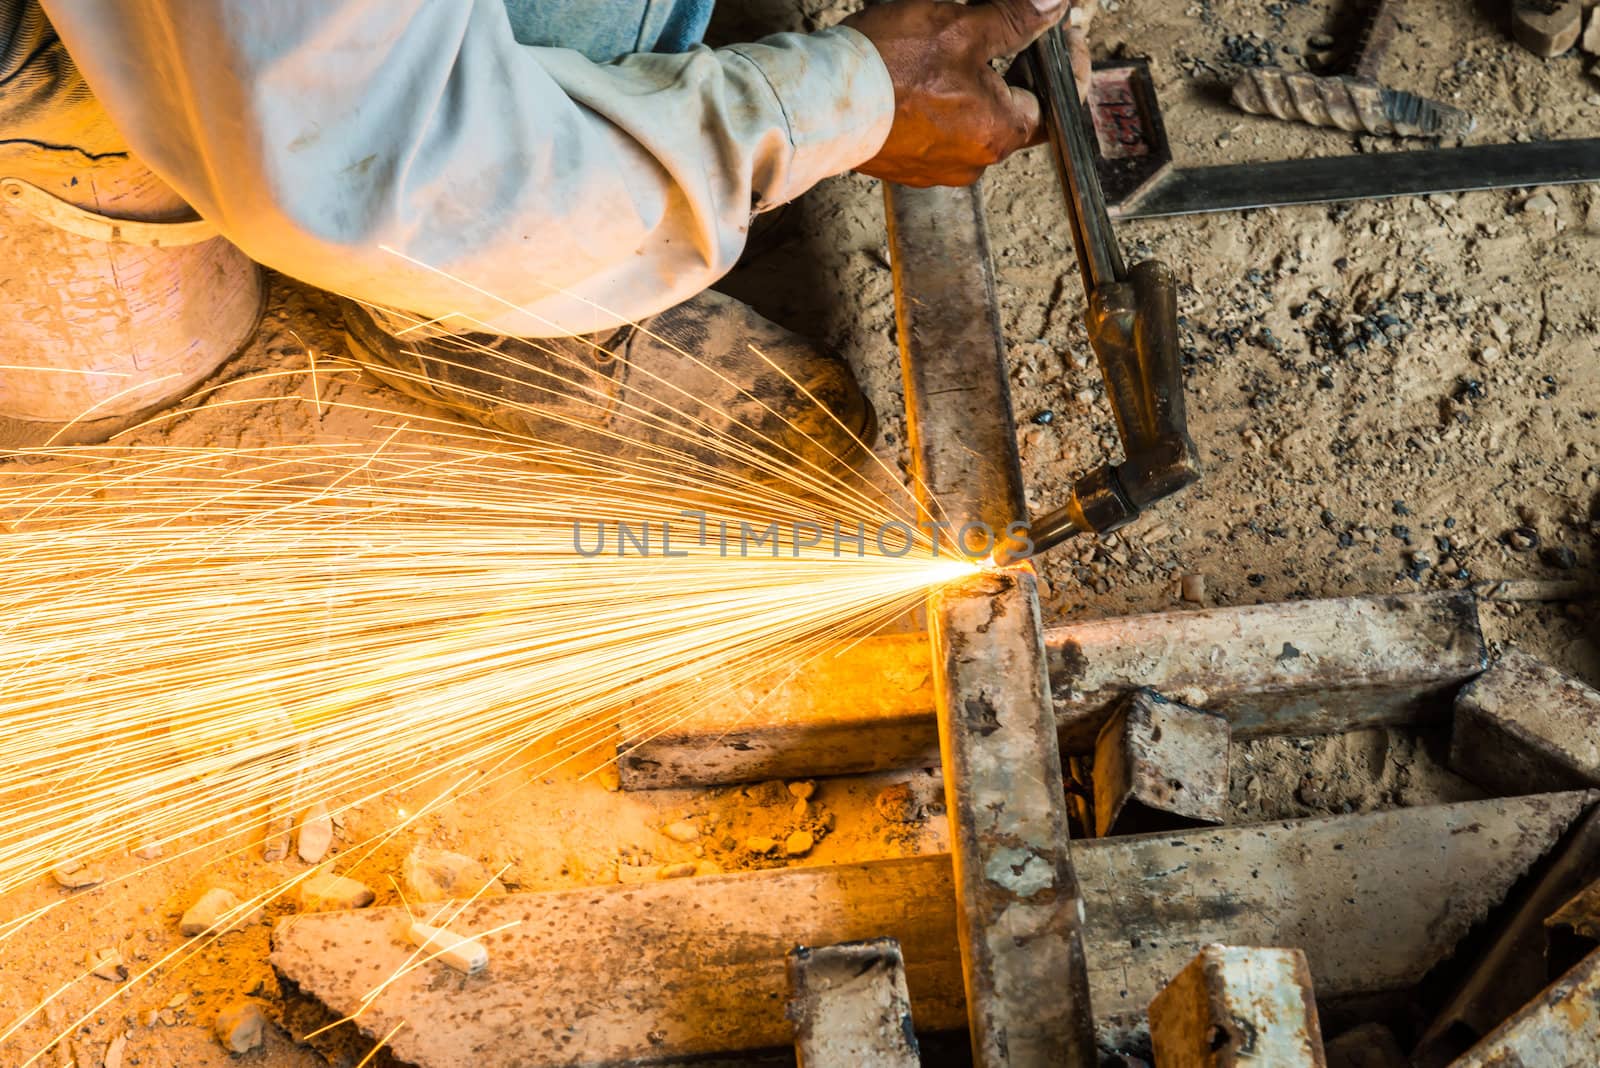 metal cutting with acetylene torch by wmitrmatr